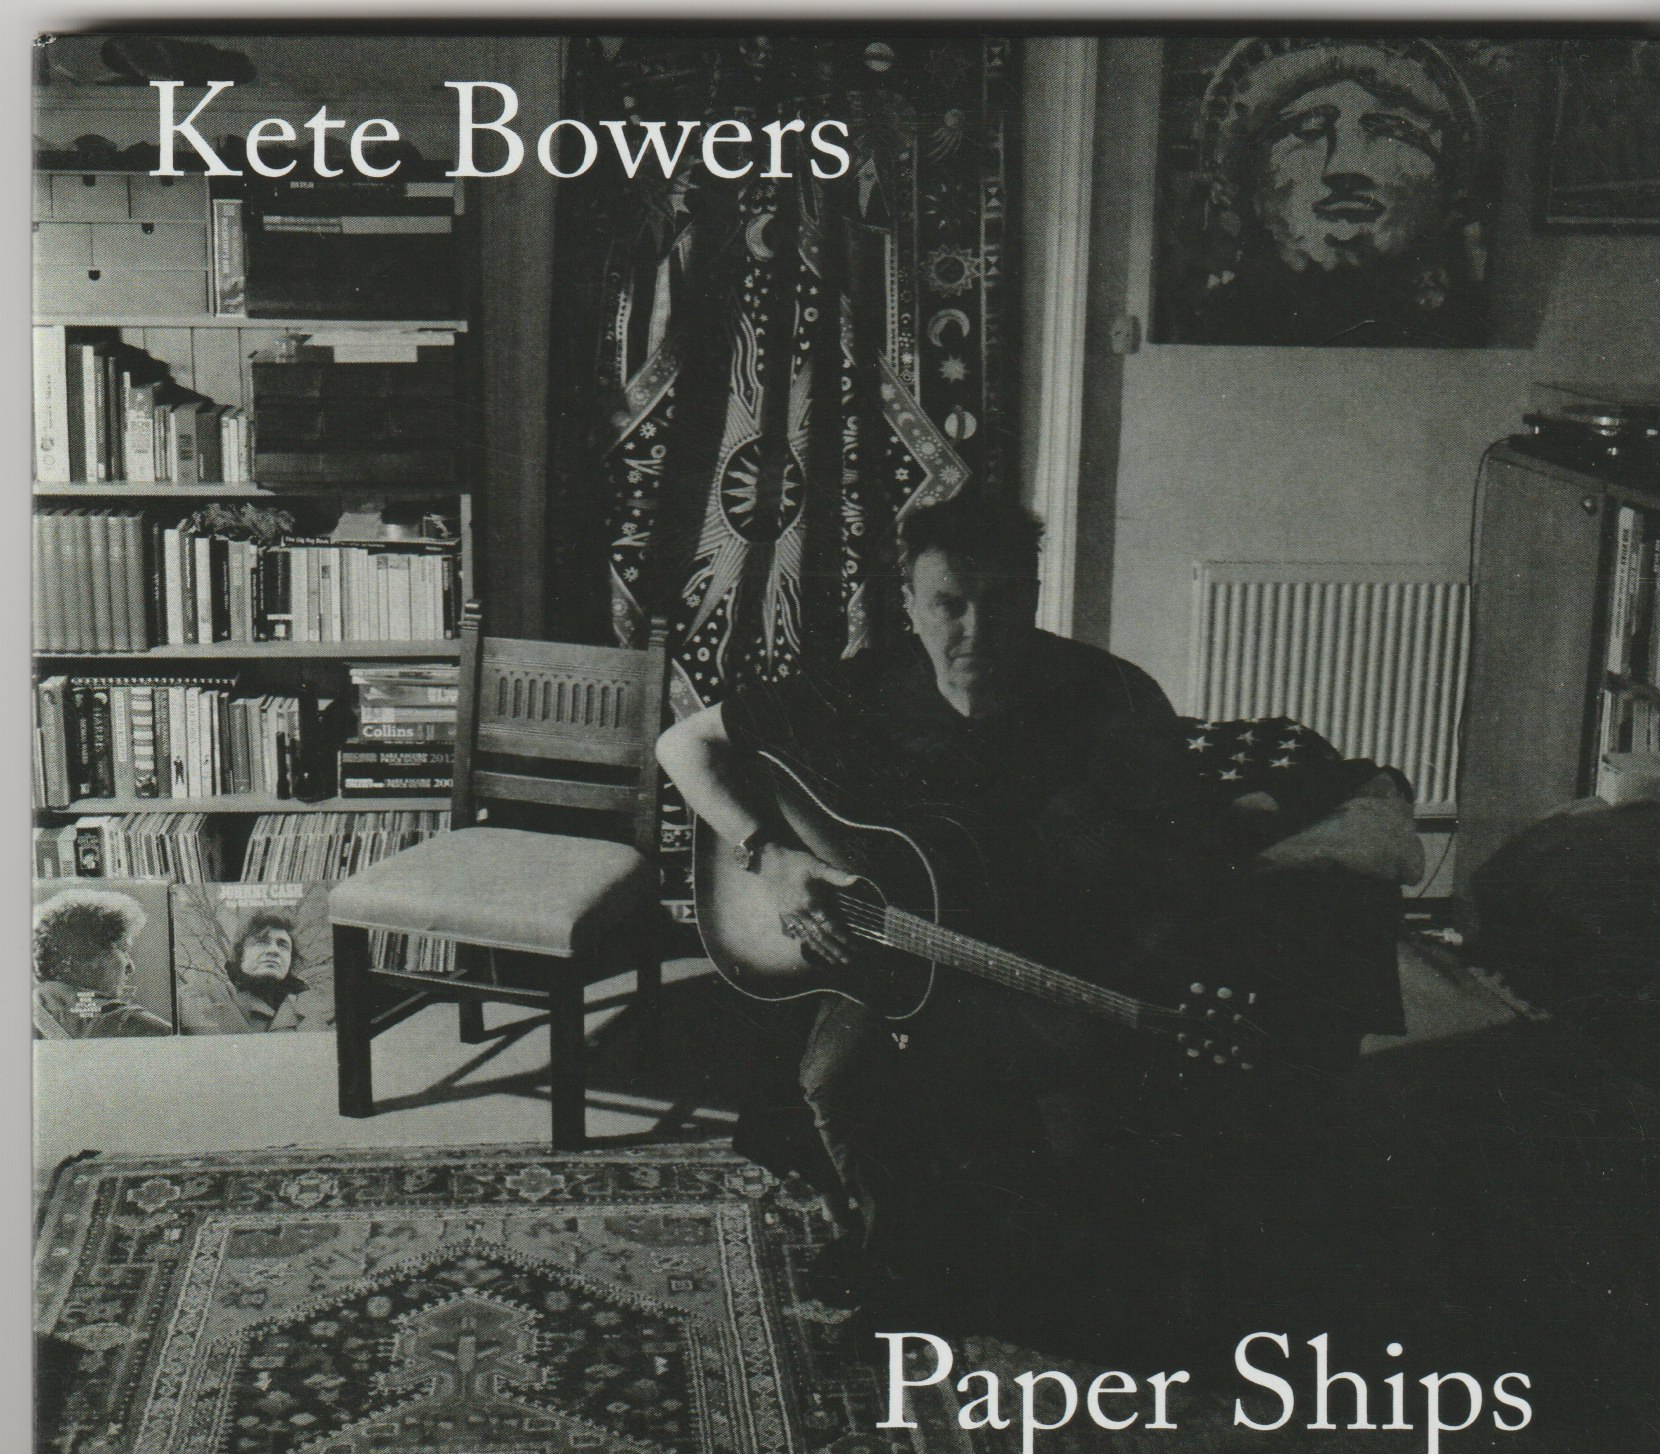 Kete Bowers Paper Ships